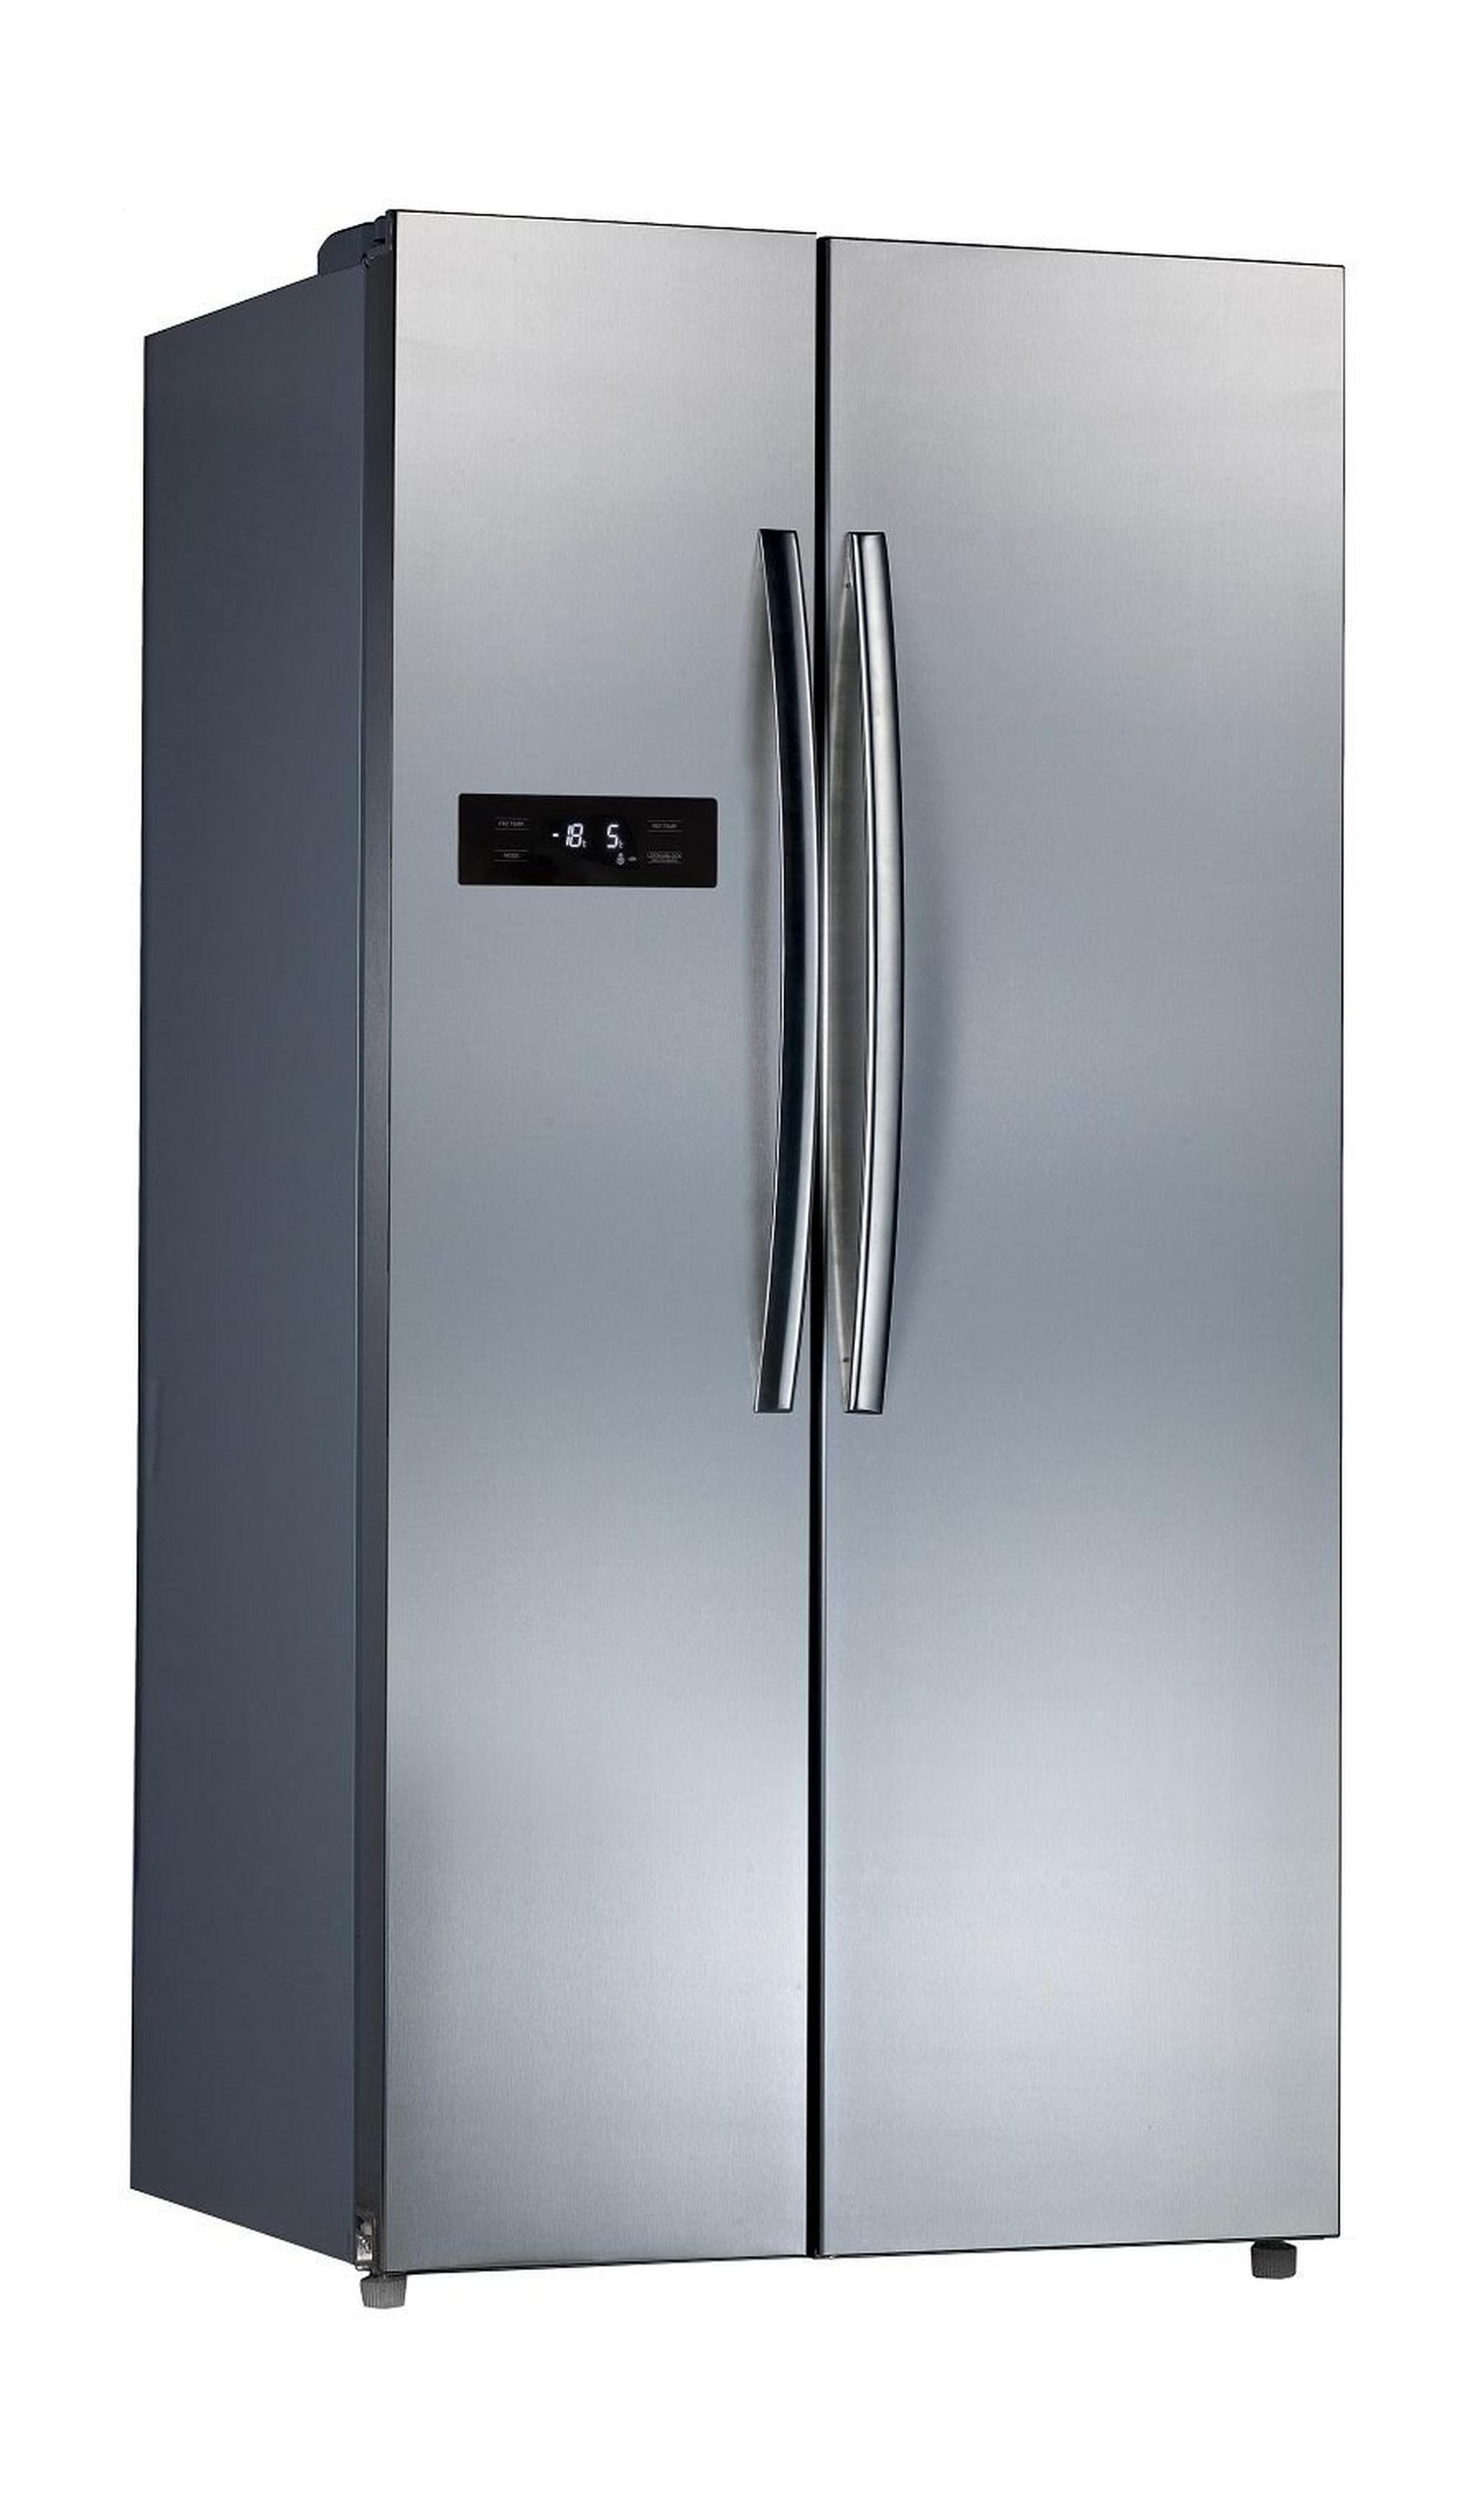 Ignis 18.6 Cft. Side By Side Refrigerator (2D27MX) – Silver